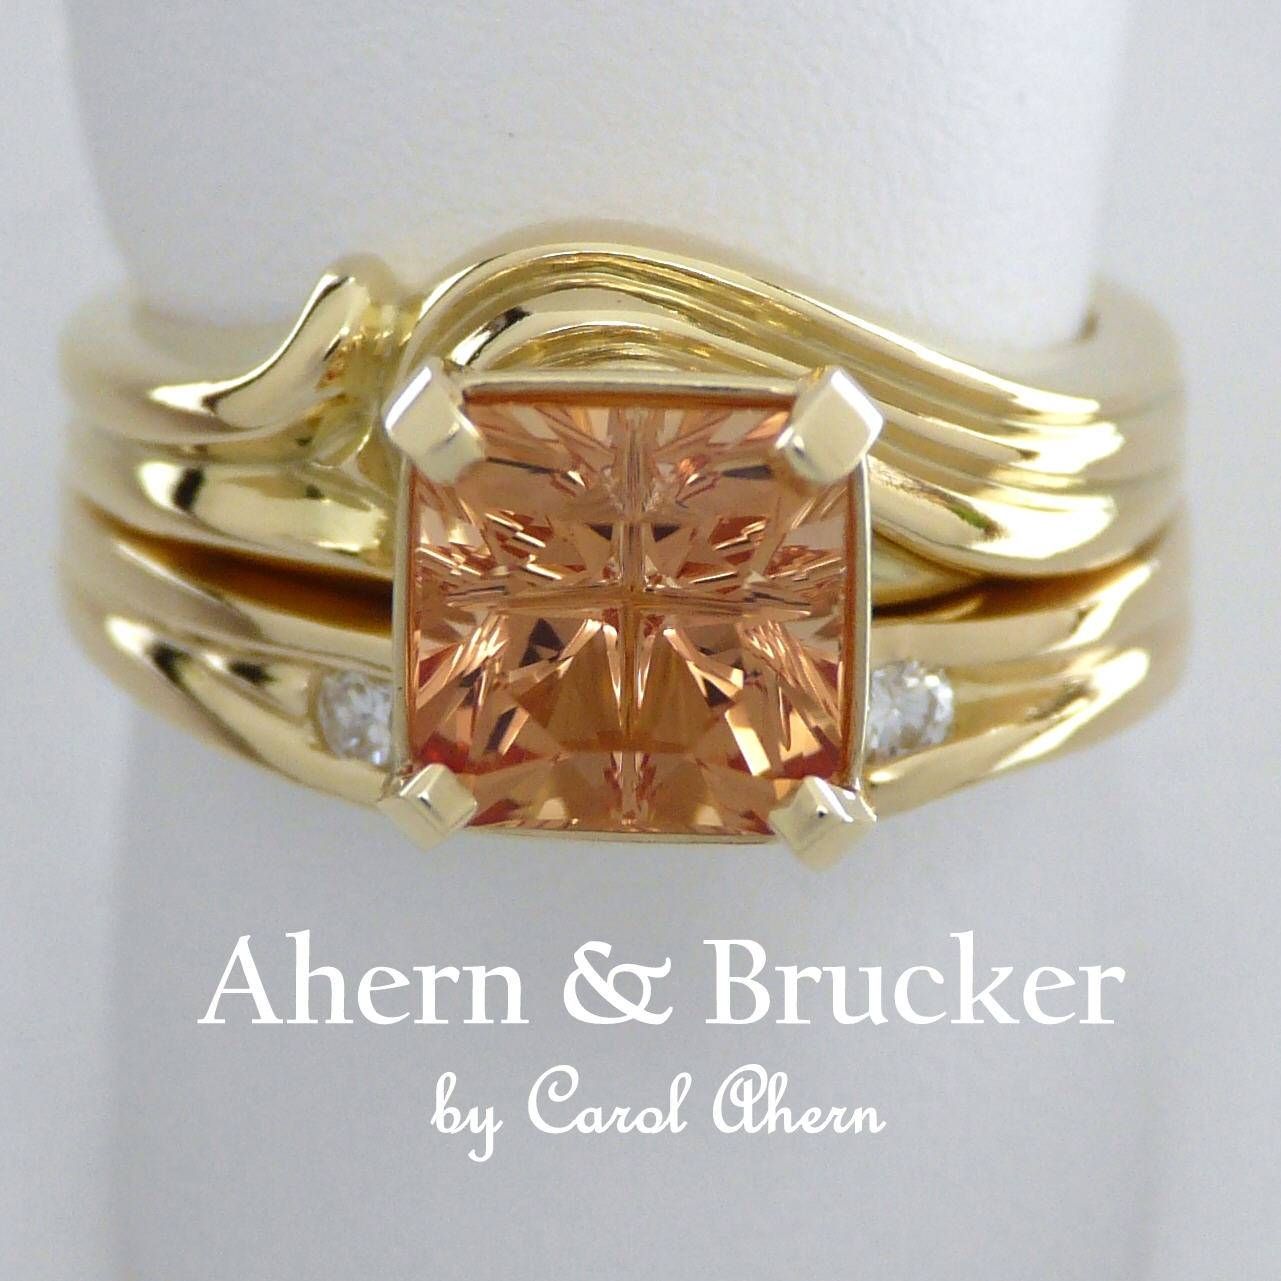 Ahern & Brucker – Golden Imperial Topaz 50th Anniversary Ring In 18k In 2017 50th Anniversary Rings (View 1 of 25)